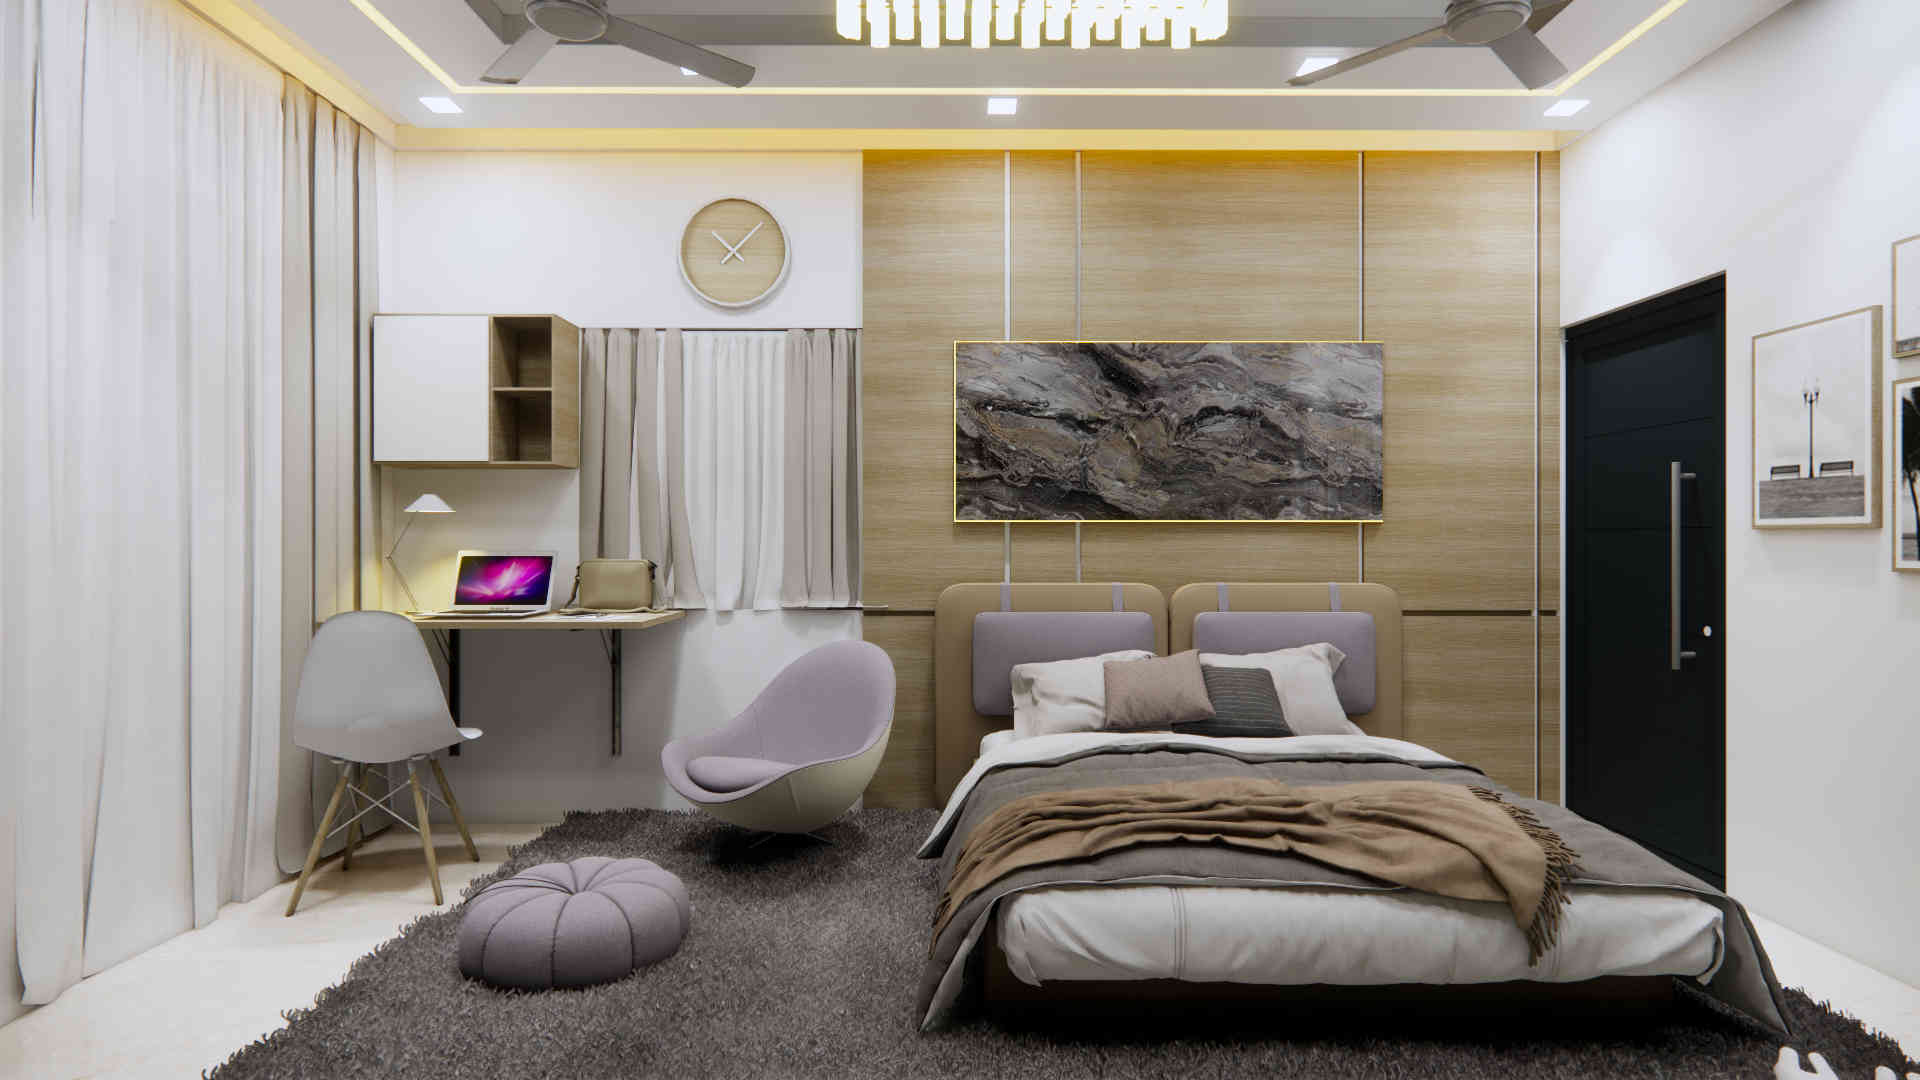 Modern Bedroom Design With Light Yellow Wall And Themed Wallpaper